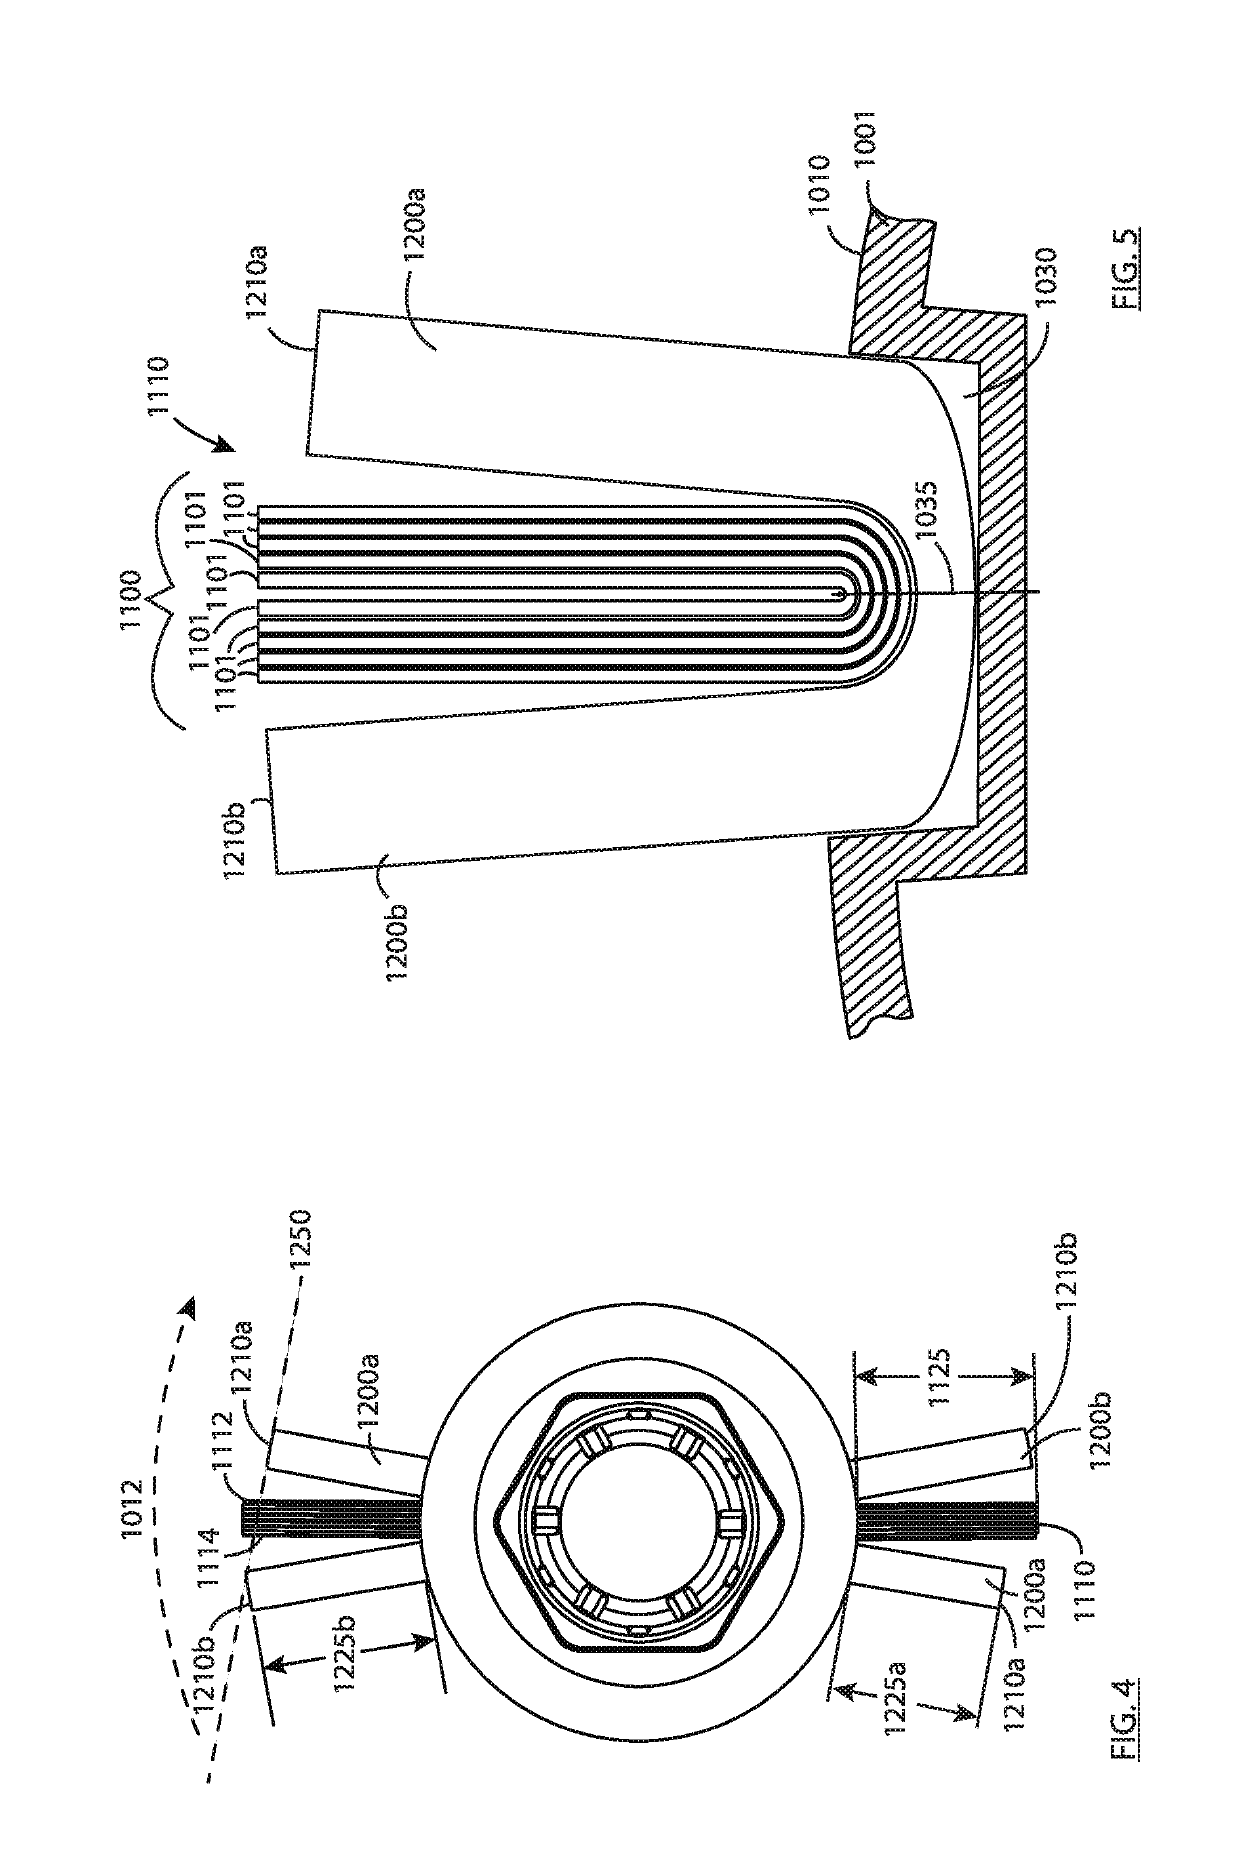 Rotatable brush for surface cleaning apparatus